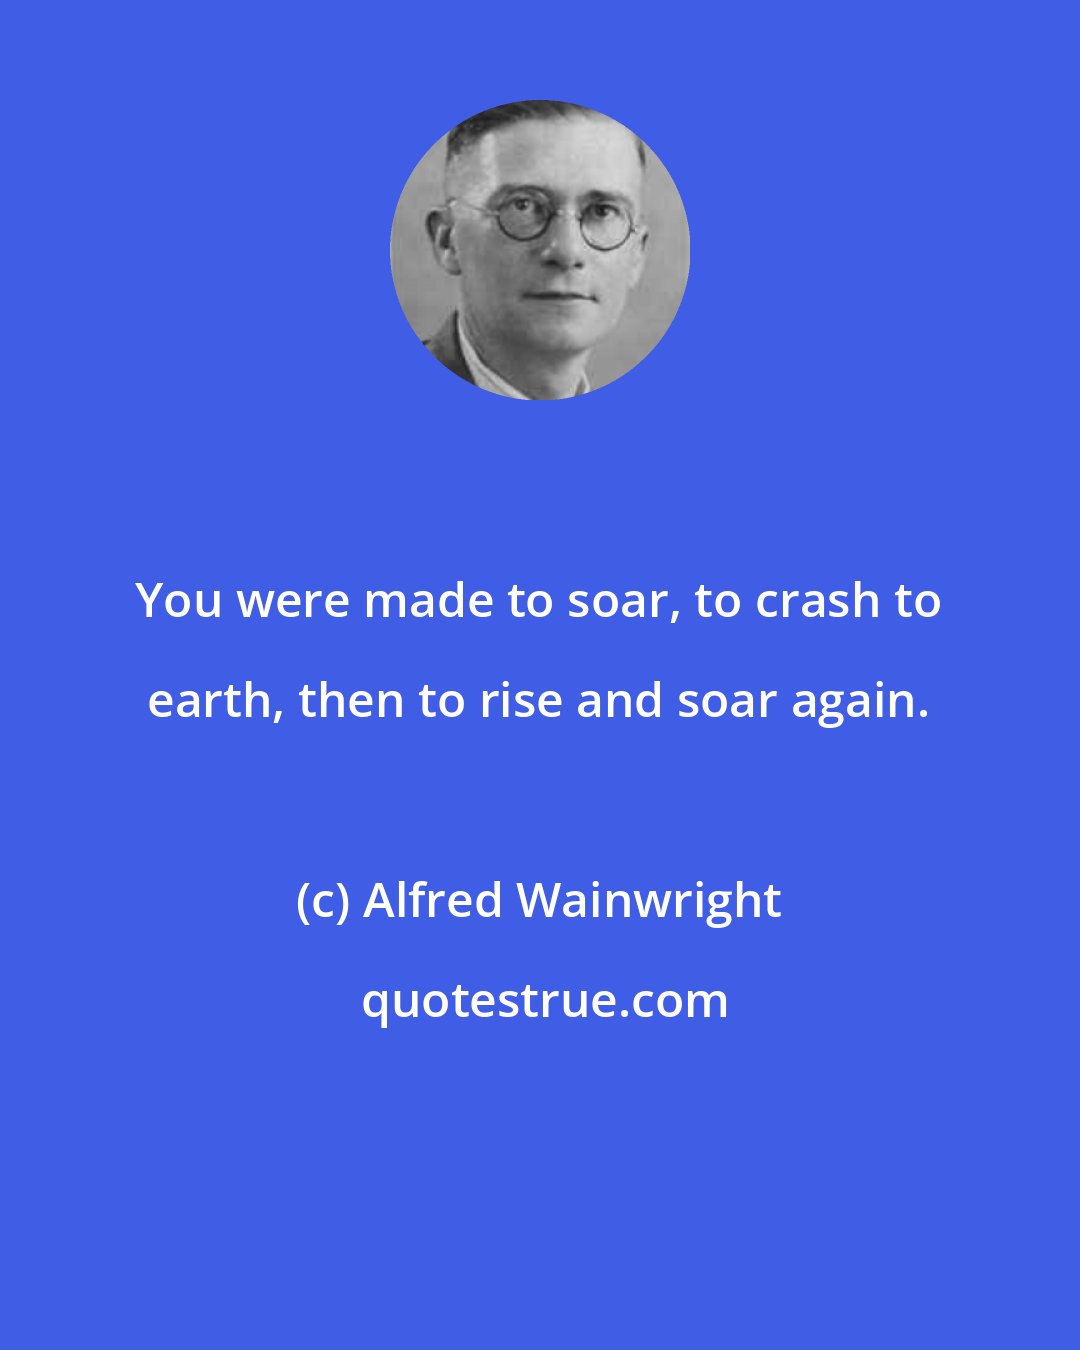 Alfred Wainwright: You were made to soar, to crash to earth, then to rise and soar again.